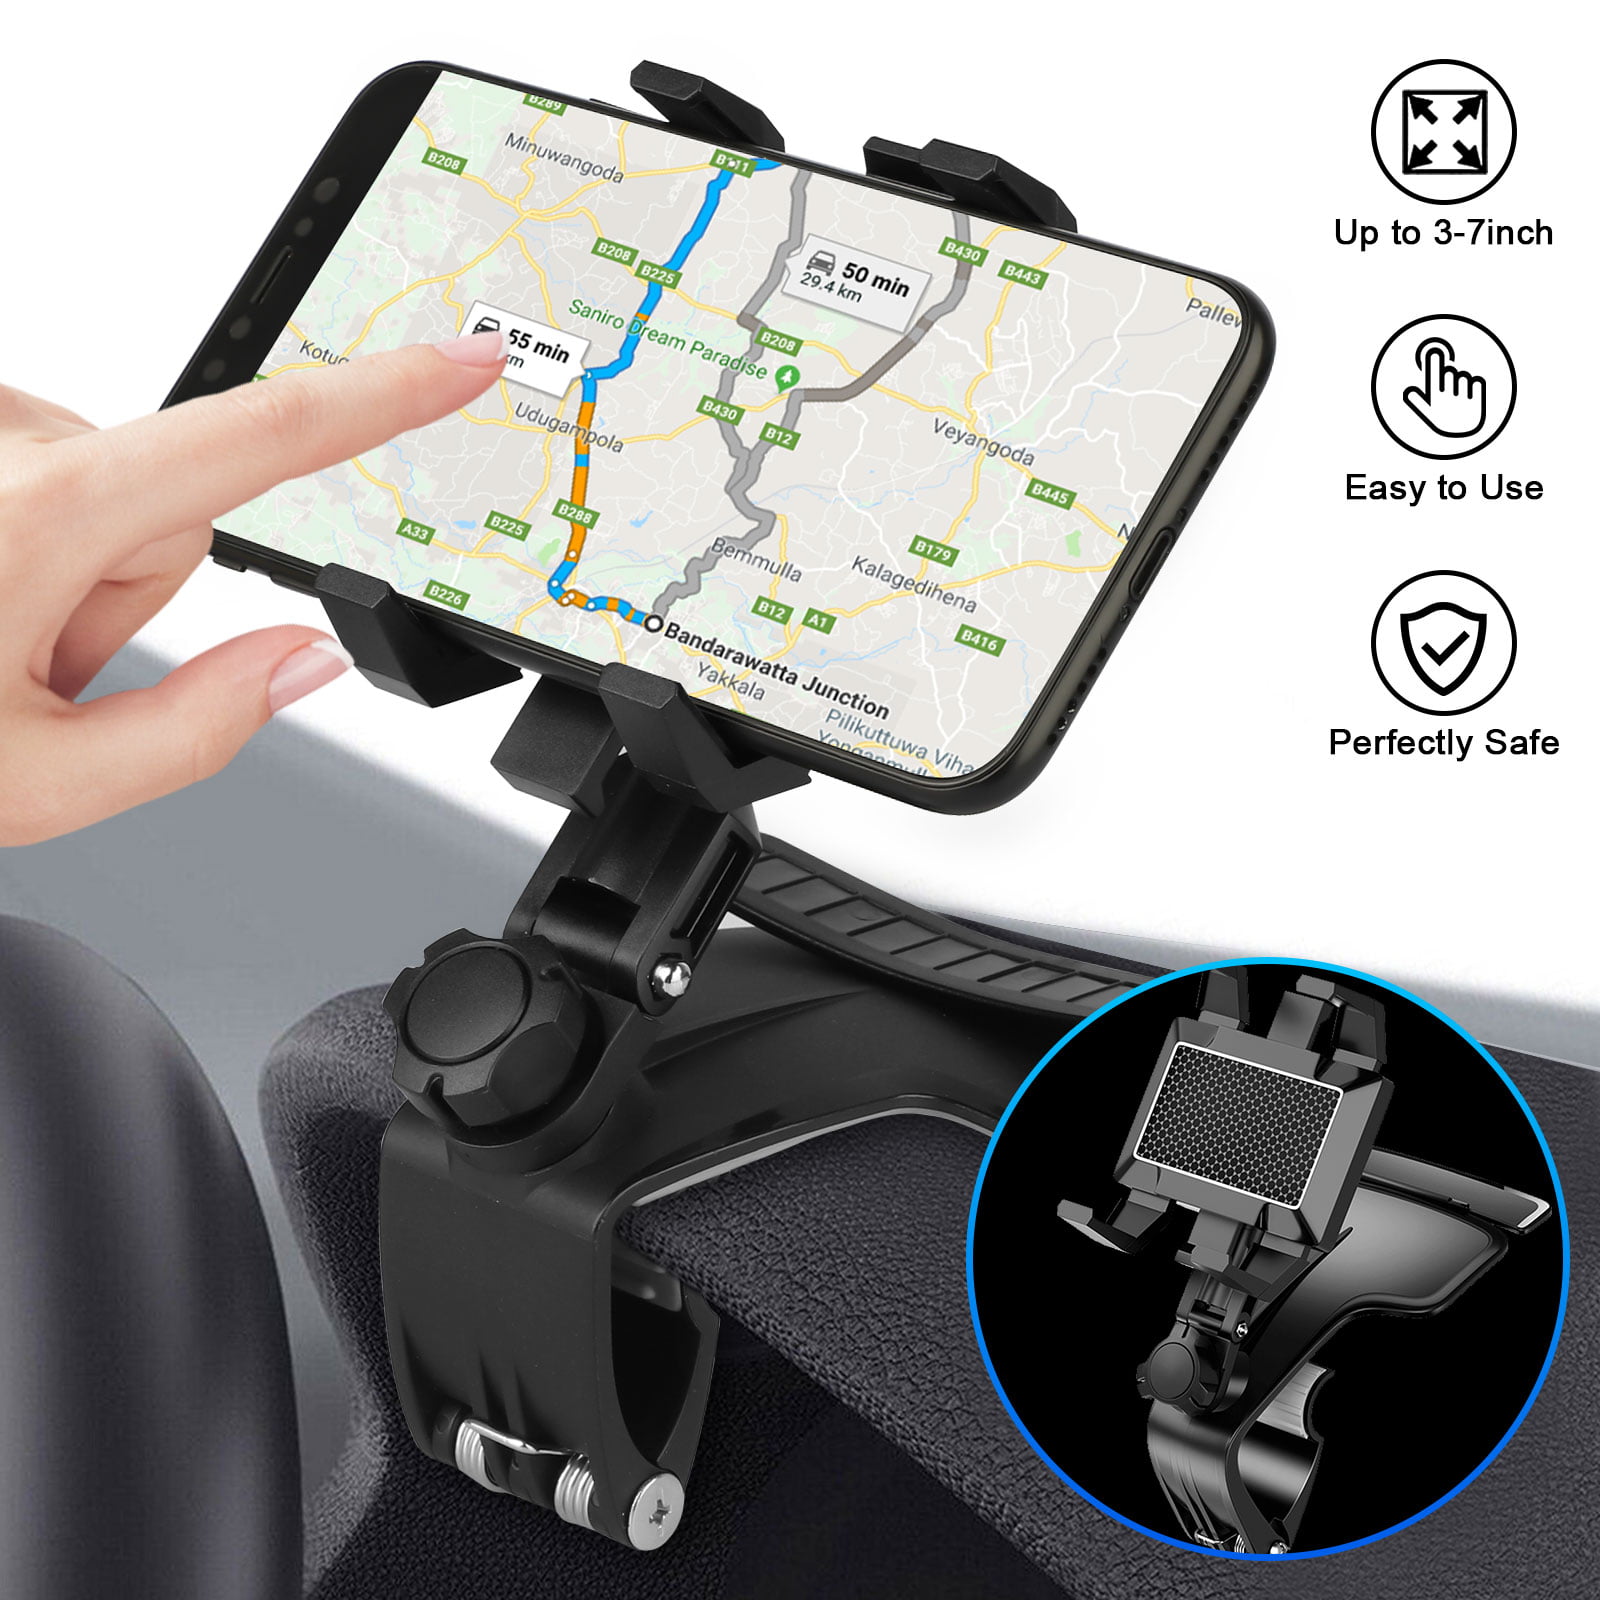 Steering Wheel Holder,Universal Car Elastic Steering Wheel Clip Mount Holder Cradle Stand for Mobile Phone GPS,for The Phone Screen Below 5.5 inch